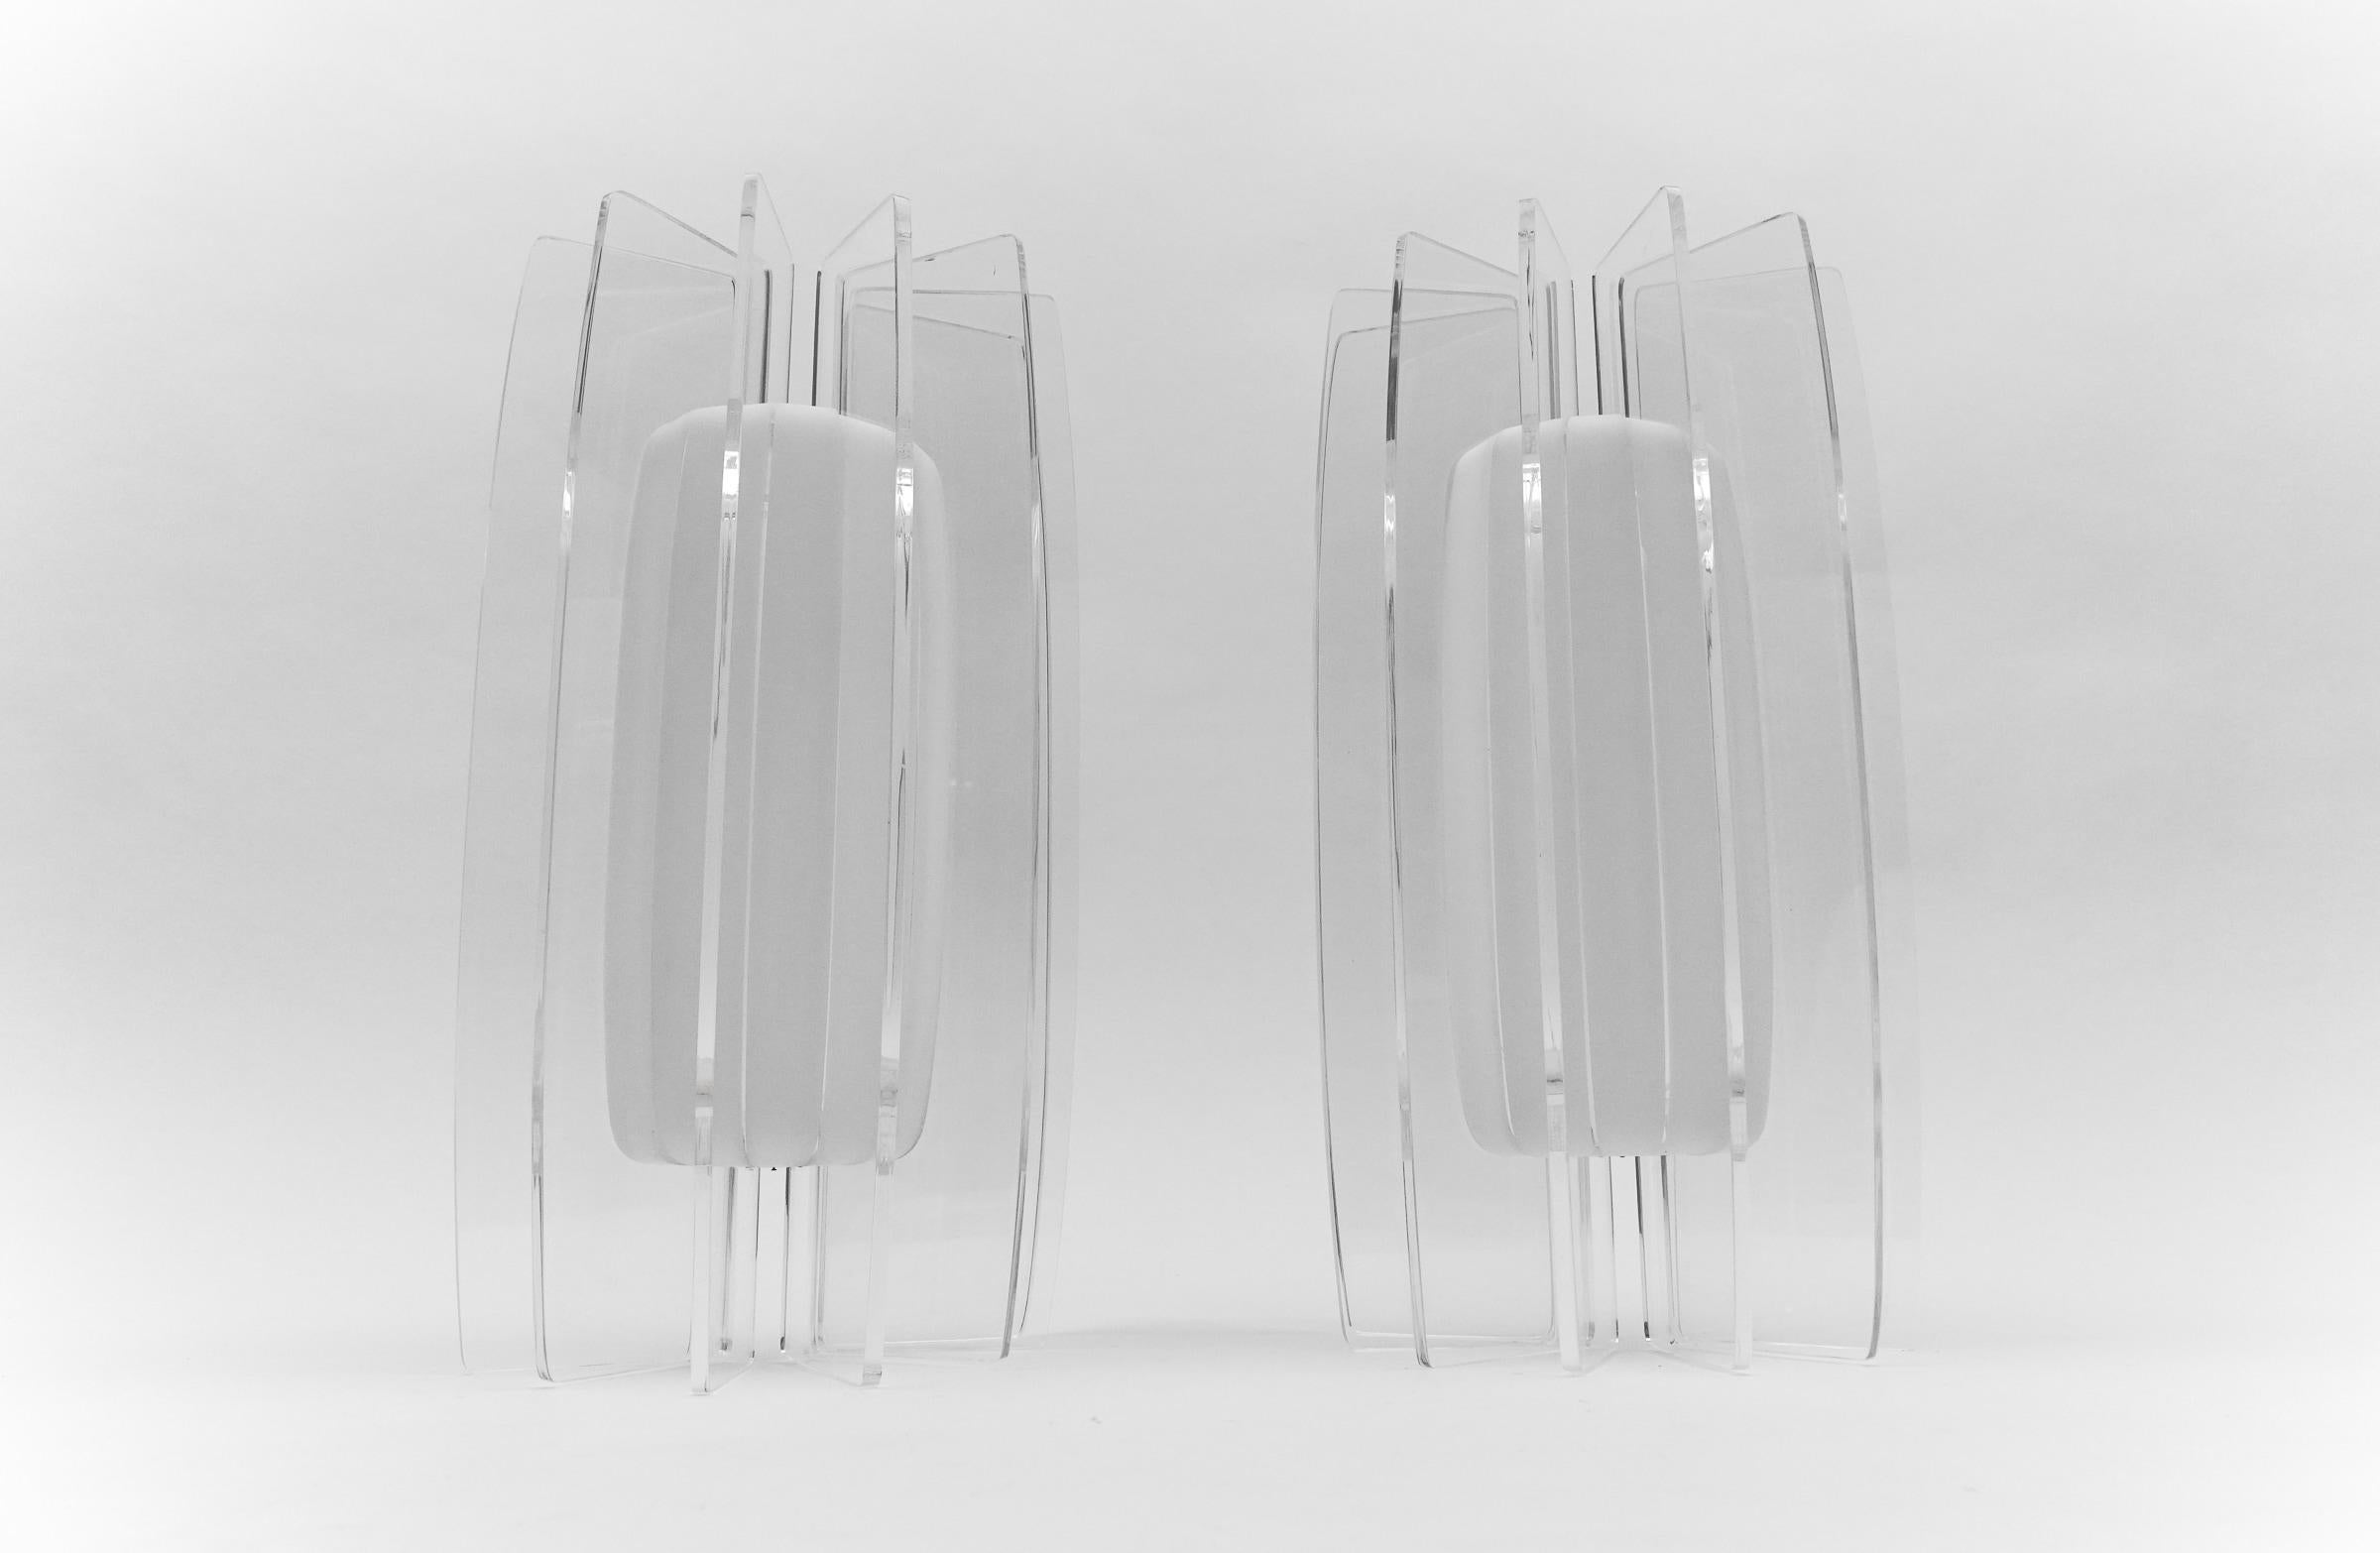 Pair of Awesome Large Acrylic Fan Wall Lamps, 1960s

The wall lamps come with each 2 x E14 / E15 Edison screw fit bulb holder, is wired and in working condition. It runs both on 110/230 Volt. Delivery without bulb.

Our lamps are checked, cleaned